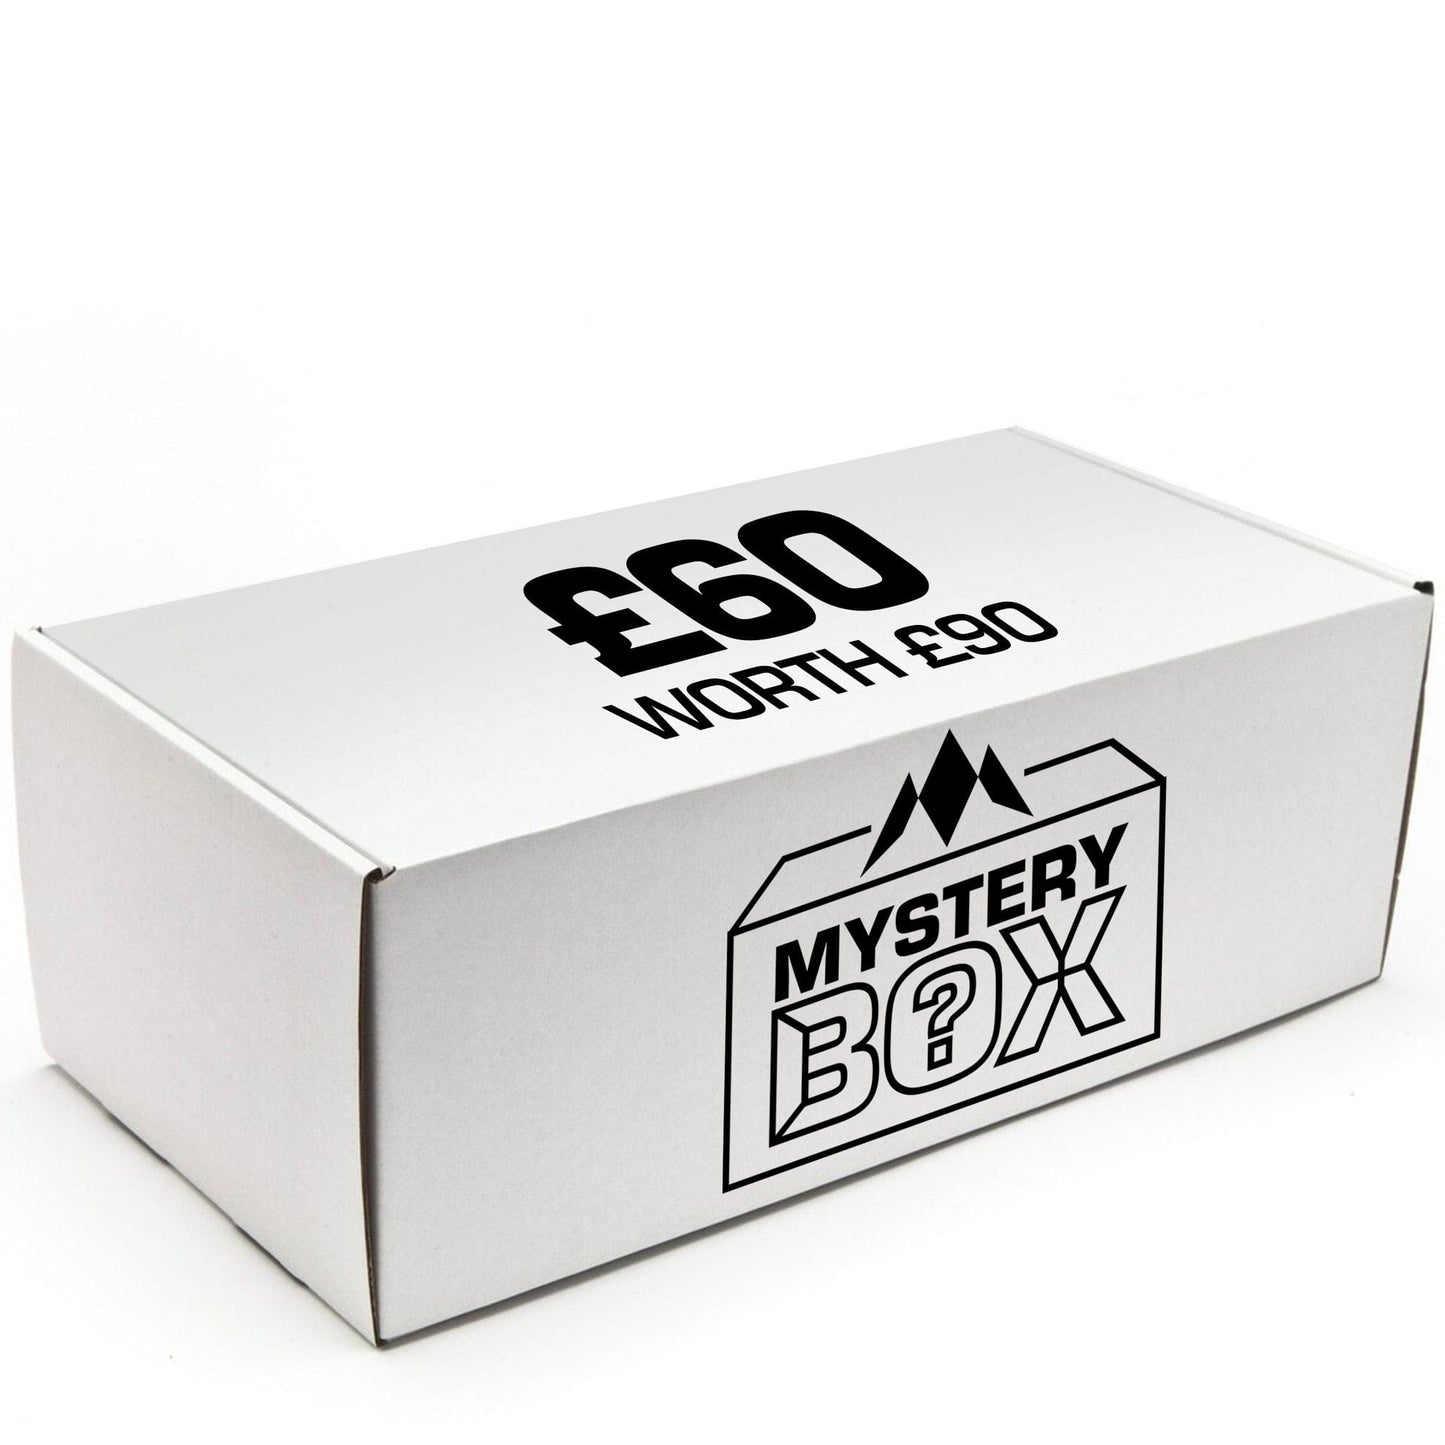 Mission Mystery Box - Soft Tip Darts & Accessories - Worth up to ¬£90